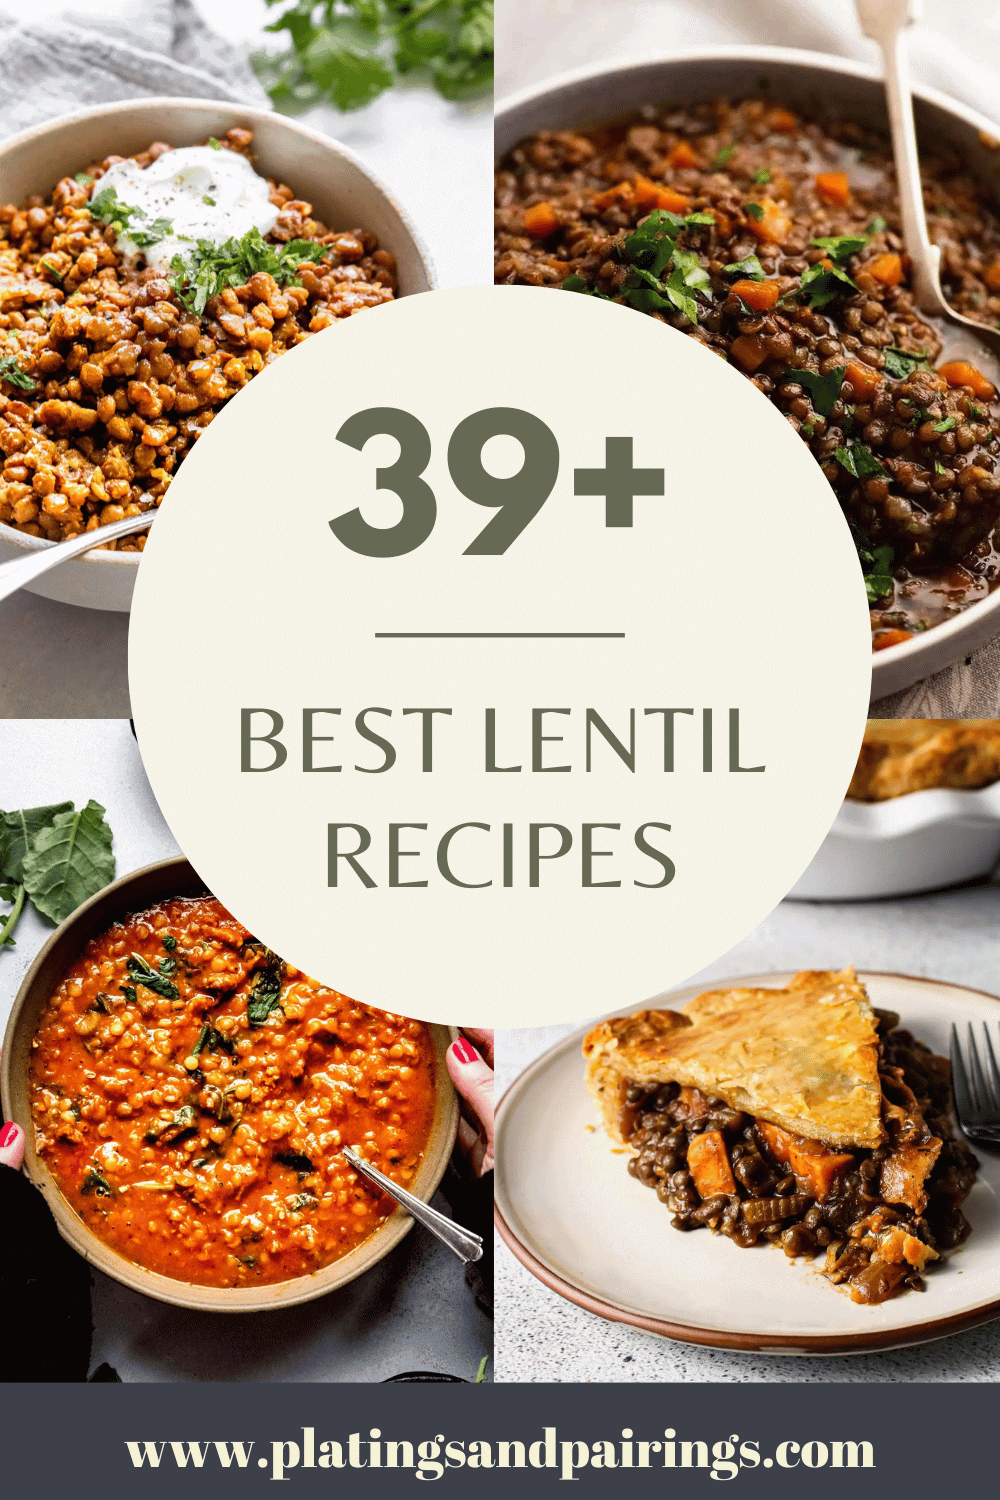 Collage of lentil recipes with text overlay.